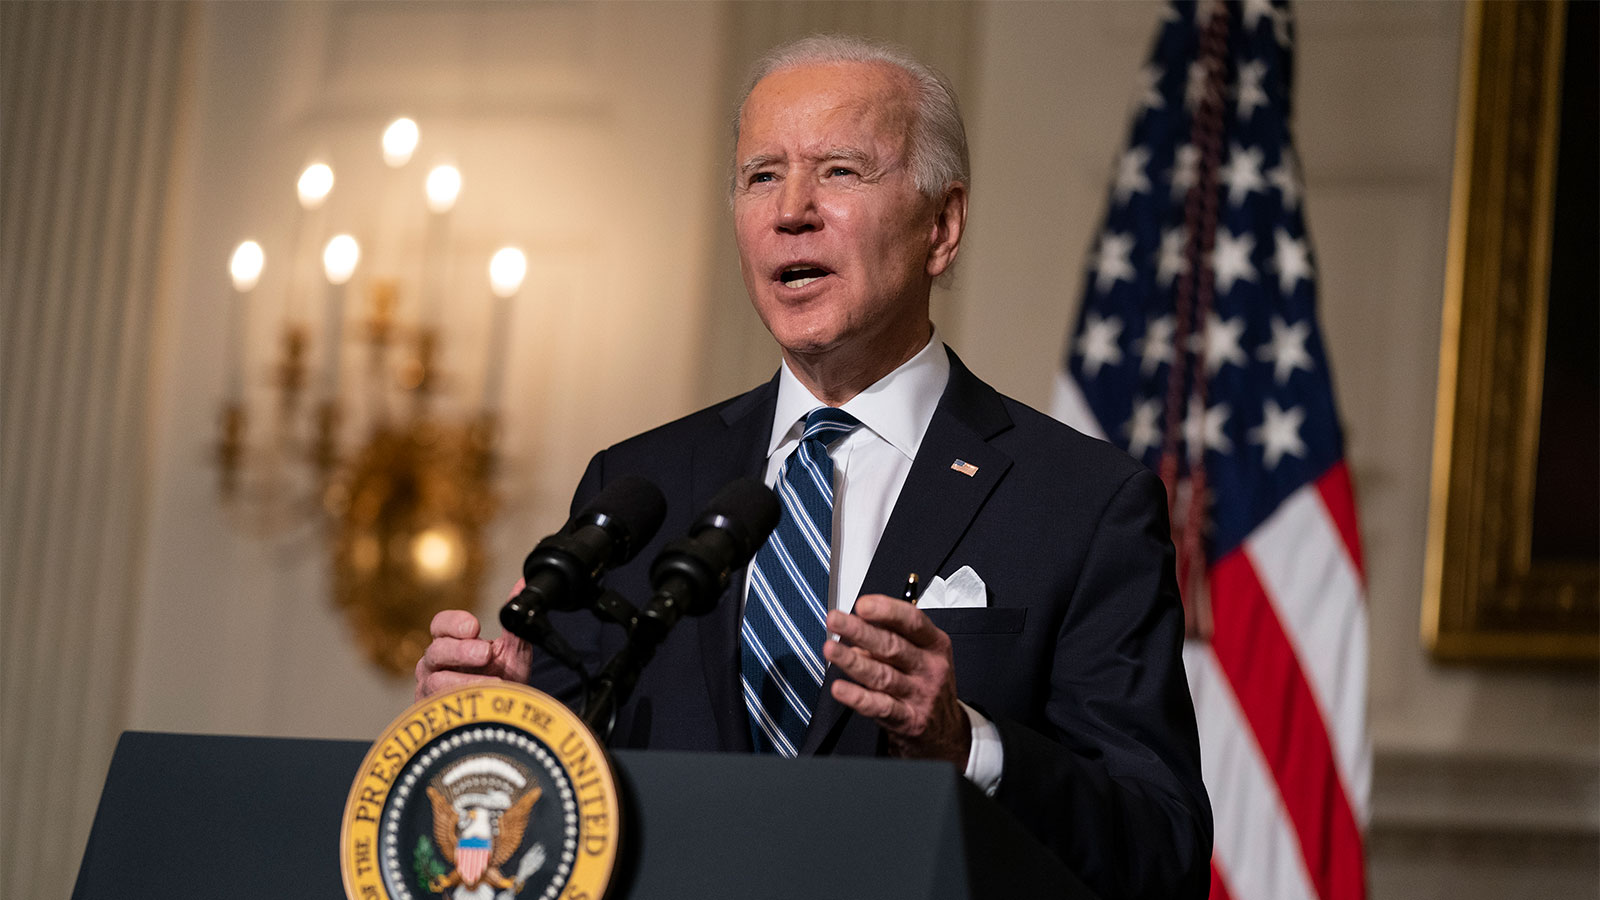 President Joe Biden delivers remarks on climate change and green jobs, in the State Dining Room of the White House